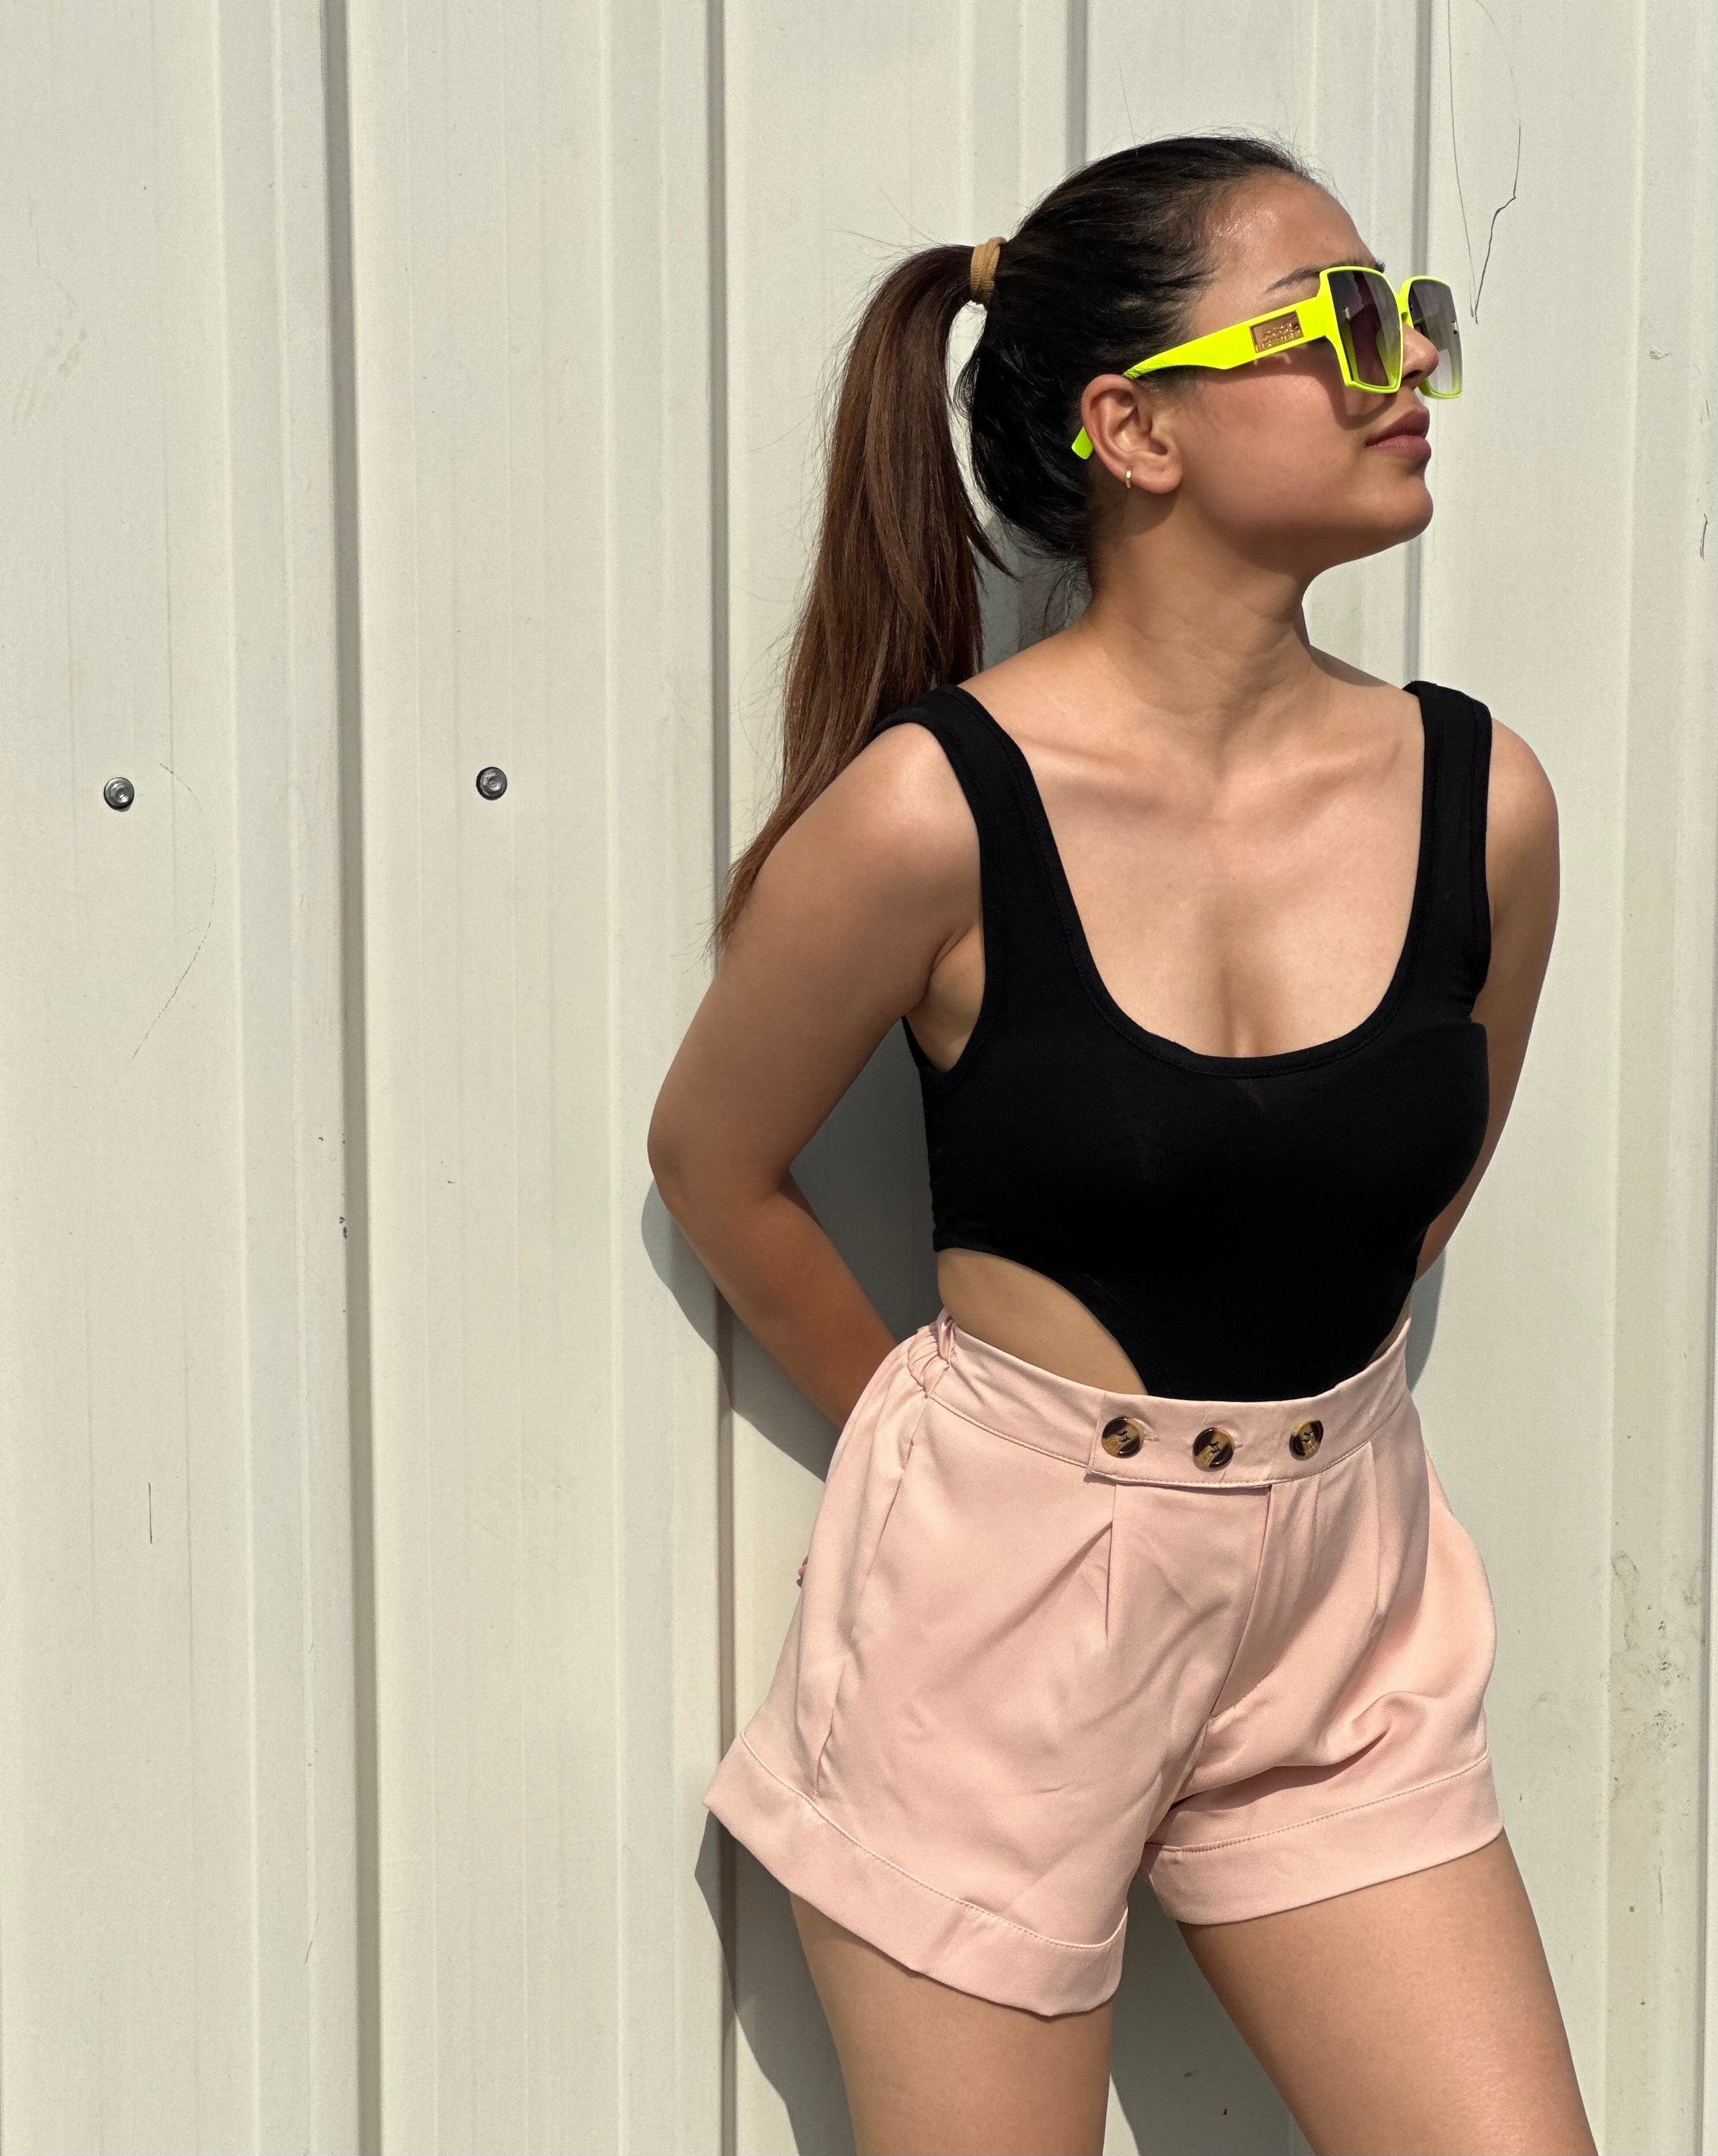 Kareena Kapoor Khan Sports A Crop Top And Hot Pants In This Workout Video  That Is Making Fans Sweat On Social Media